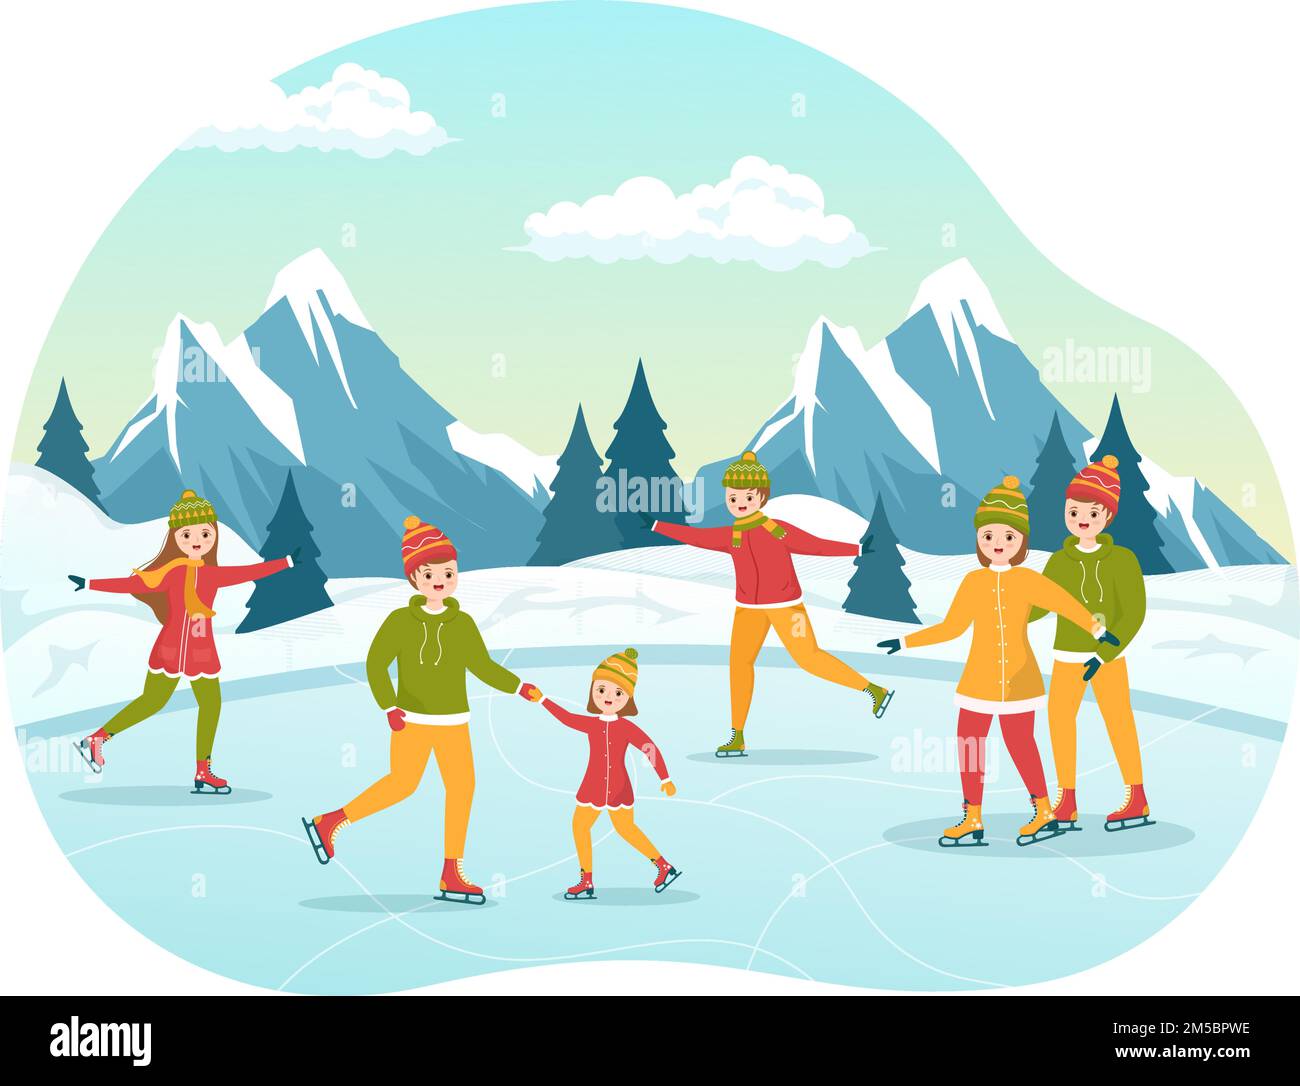 Men, Women and Kids Skating on Ice Rink Wearing Winter Clothes for Outdoor Activity in Flat Cartoon Hand Drawn Templates Illustration Stock Vector